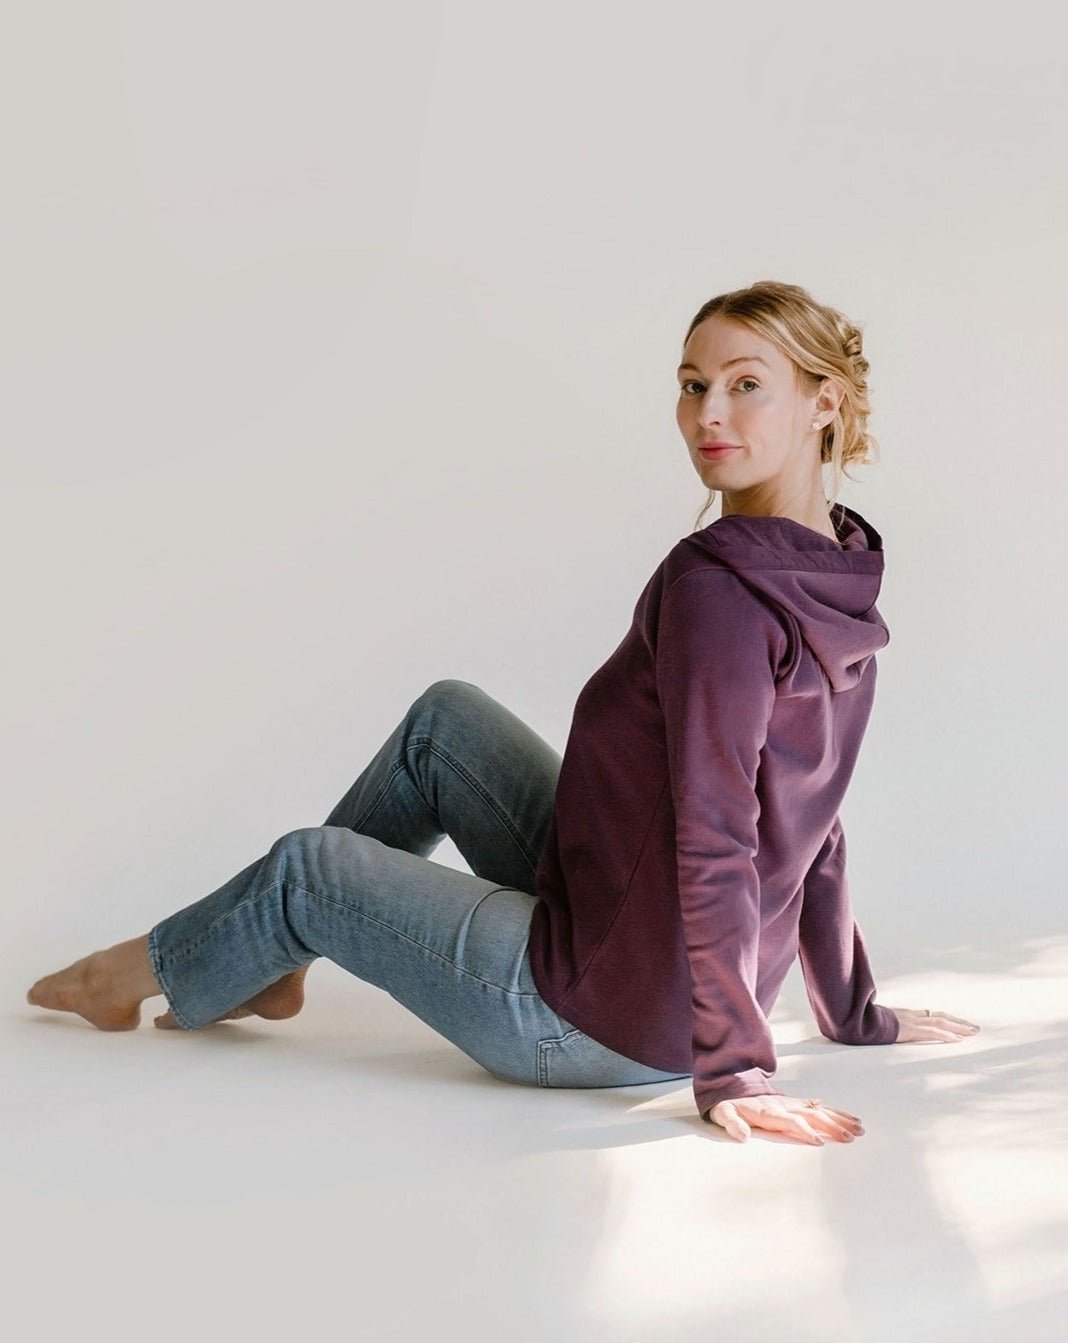 A woman is sitting on the ground wearing jeans and the amrêve purple organic hoodie.